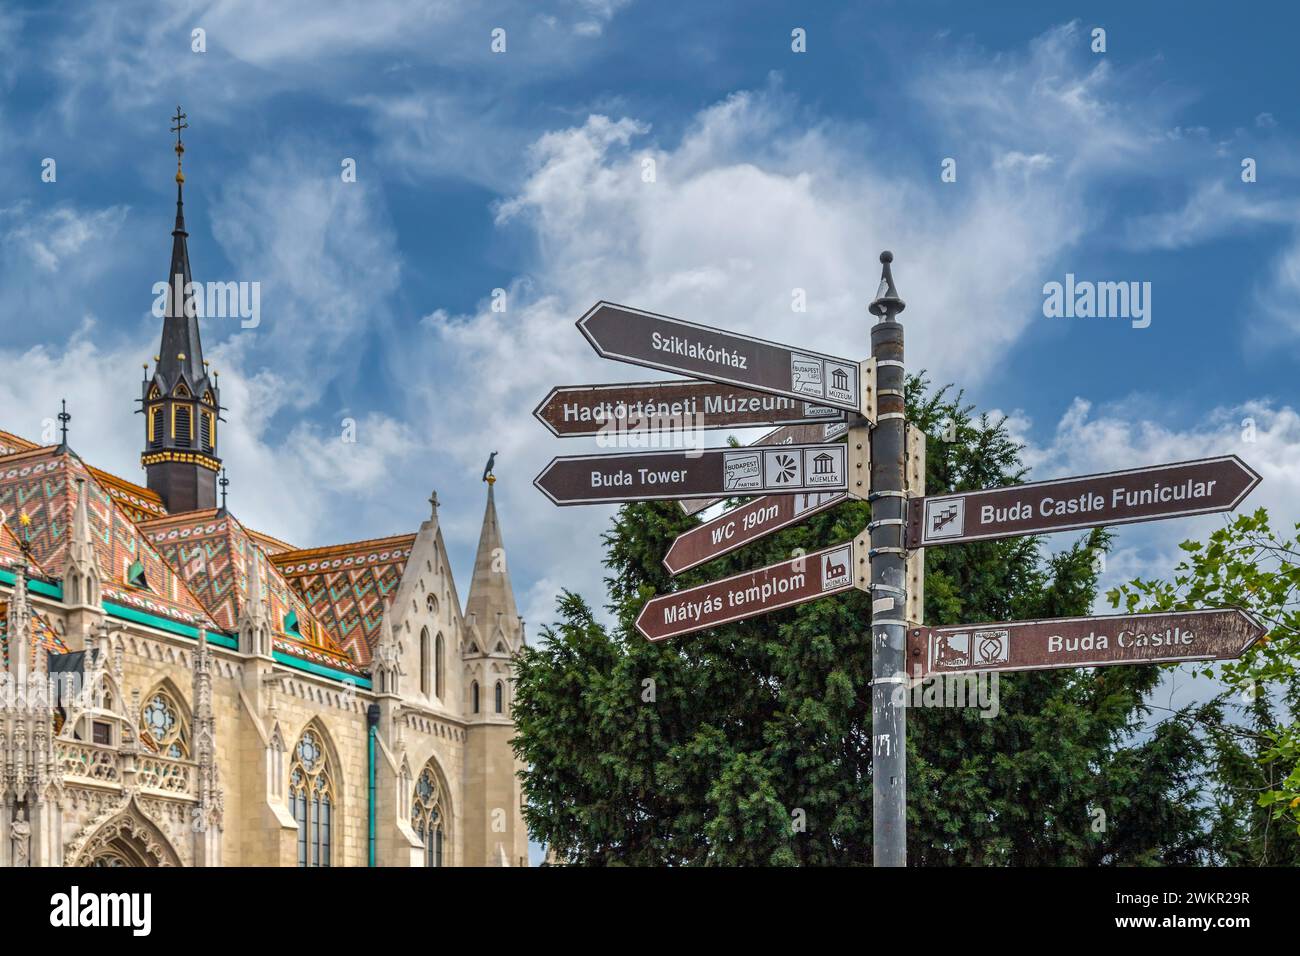 BUDAPEST, HUNGARY - AUGUST 23, 2021: Info Point located in Szentháromság square with street signs marking the direction to the famous sites to visit i Stock Photo